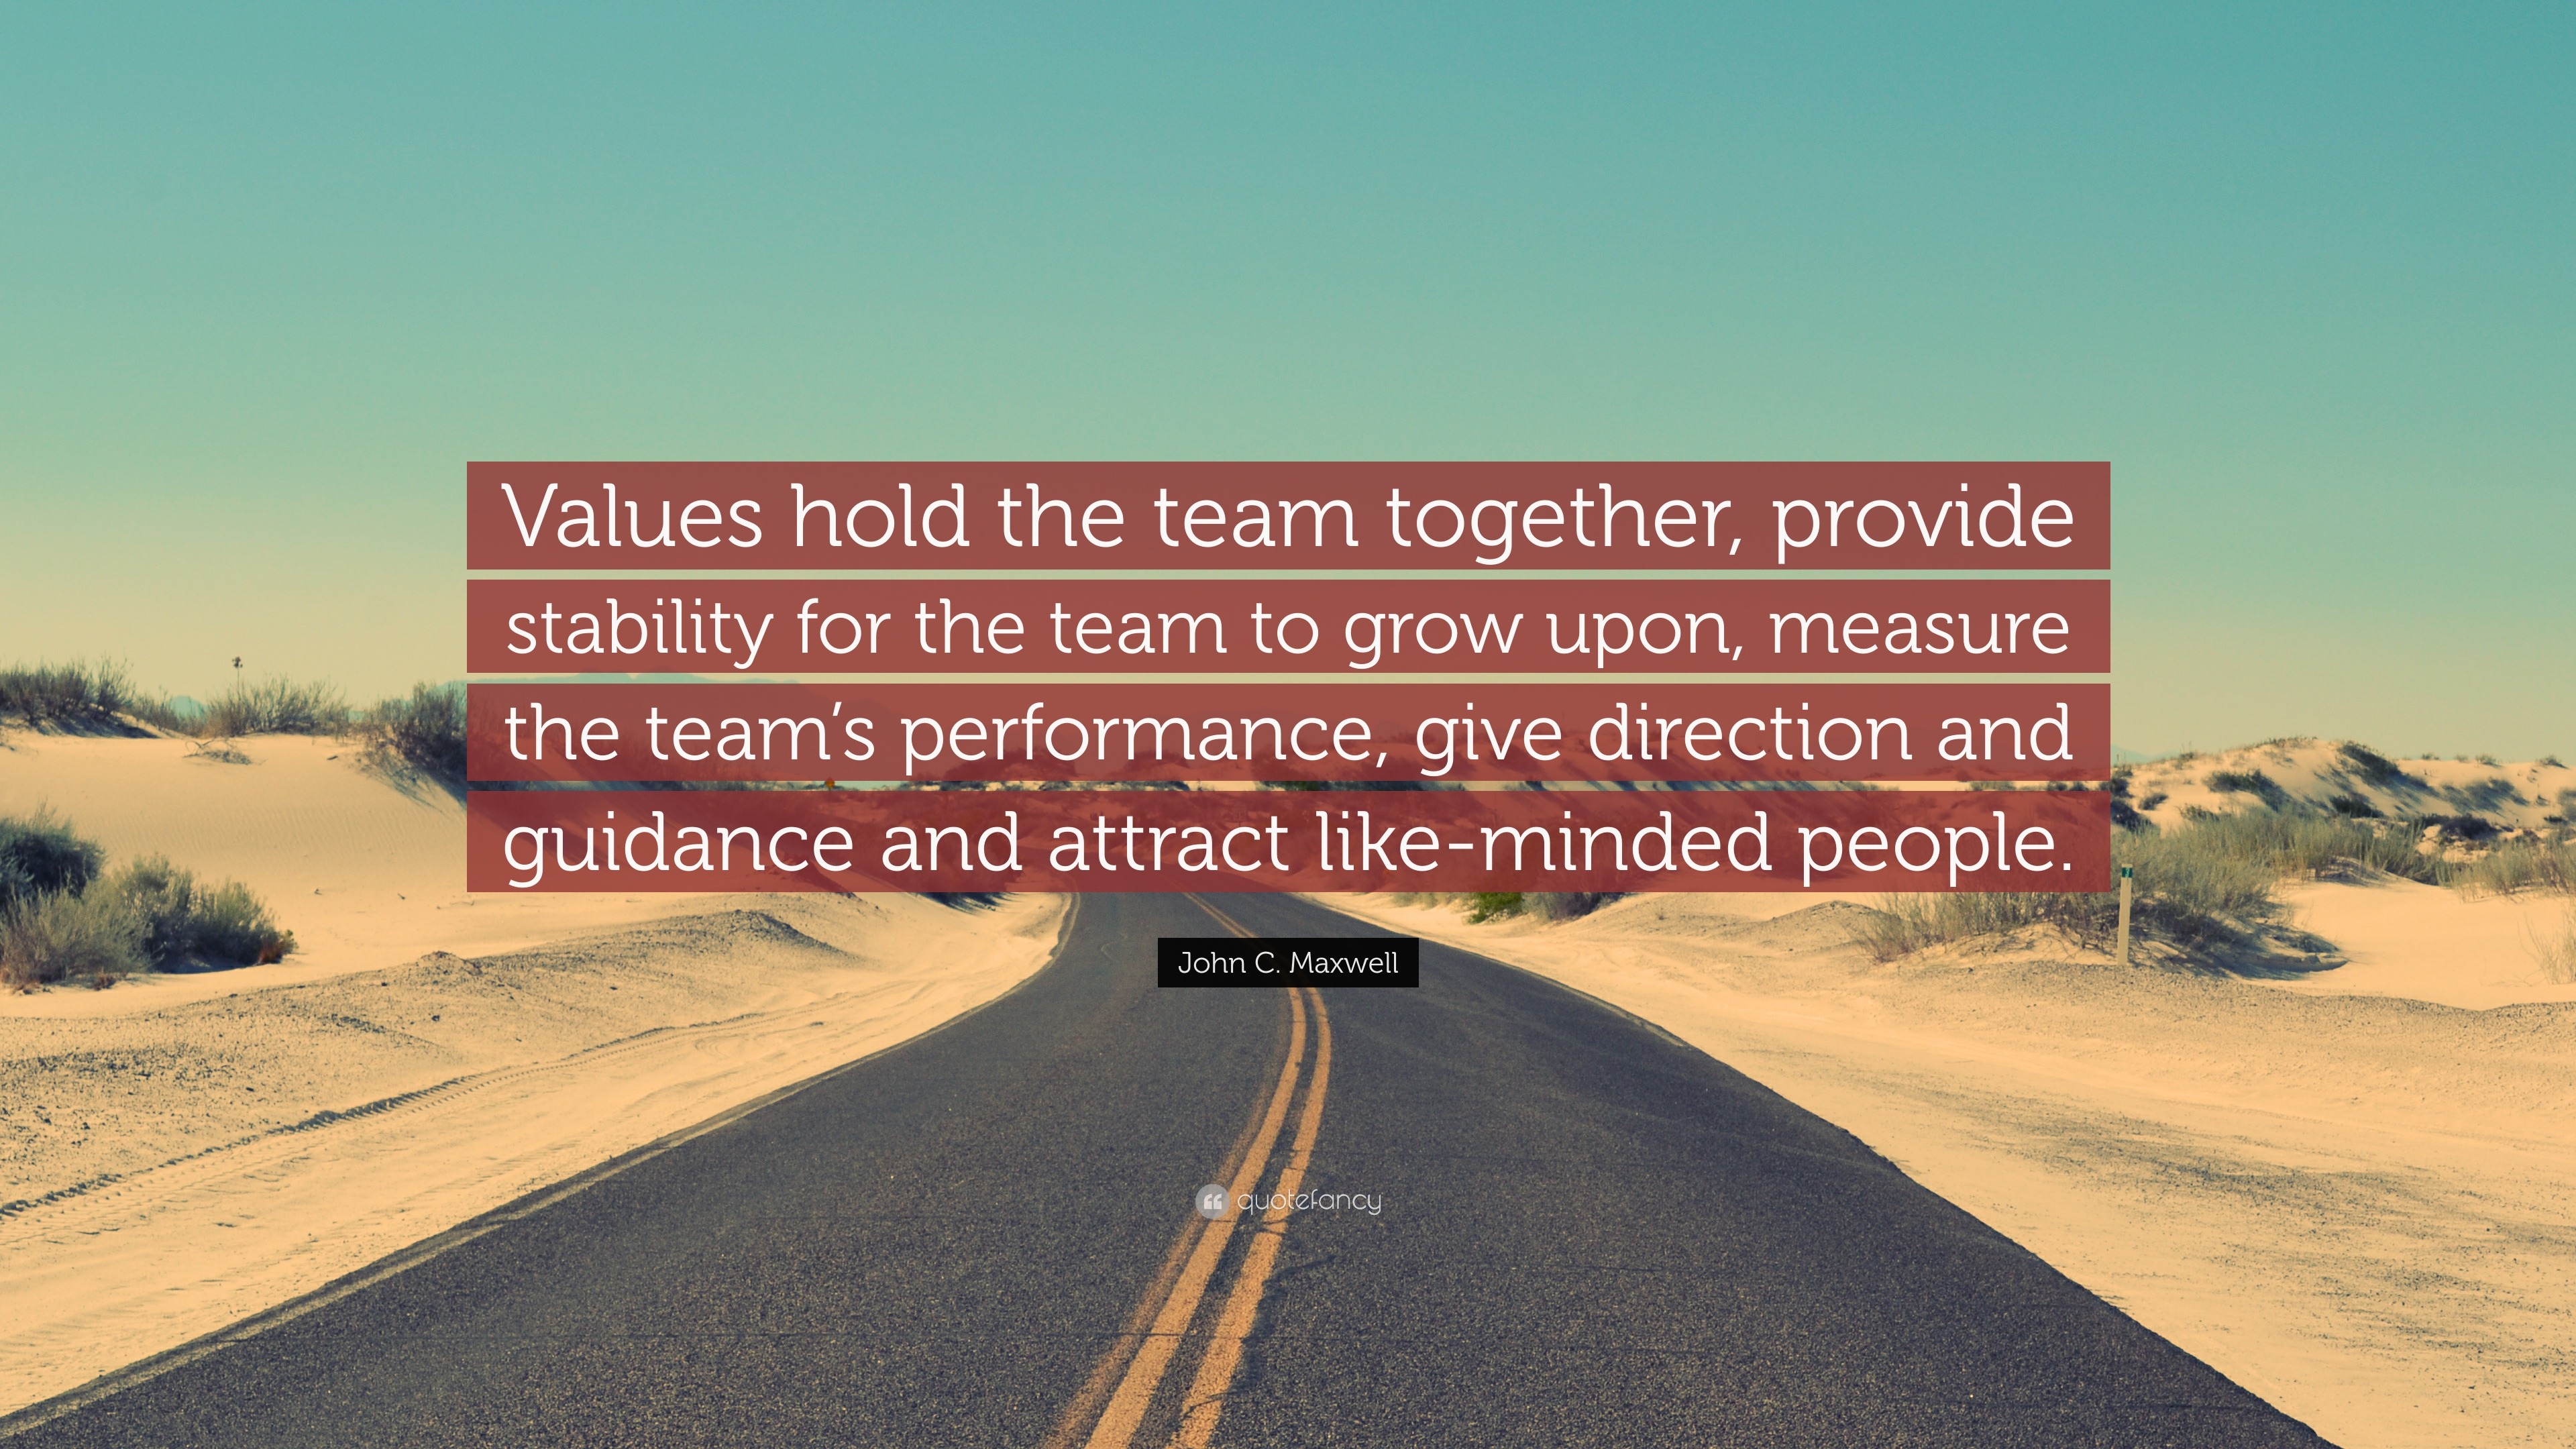 John C. Maxwell Quote: “Values hold the team together, provide